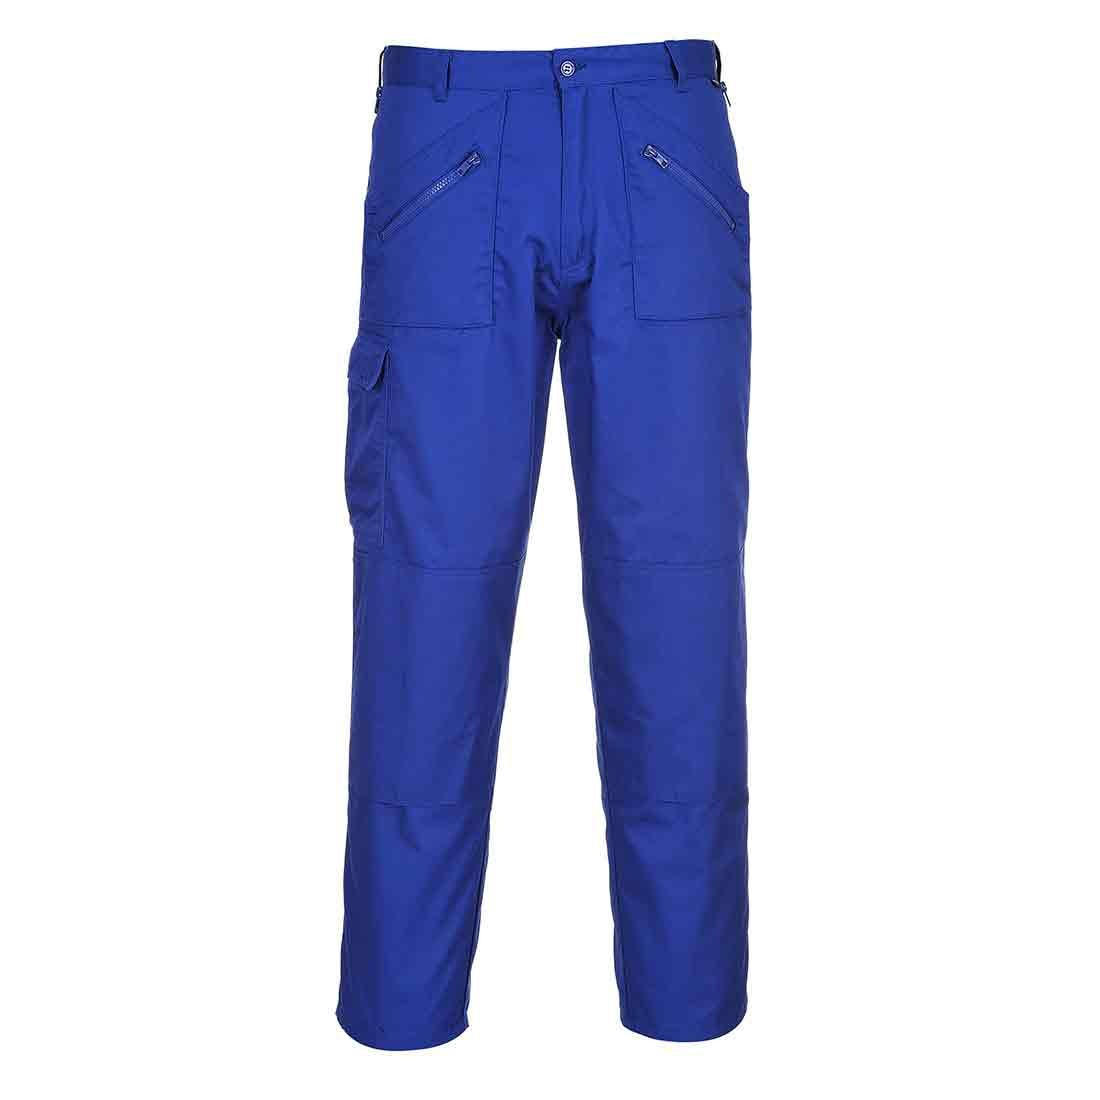 Portwest S887 Action Trousers - Work Trousers - Workwear - Best Workwear